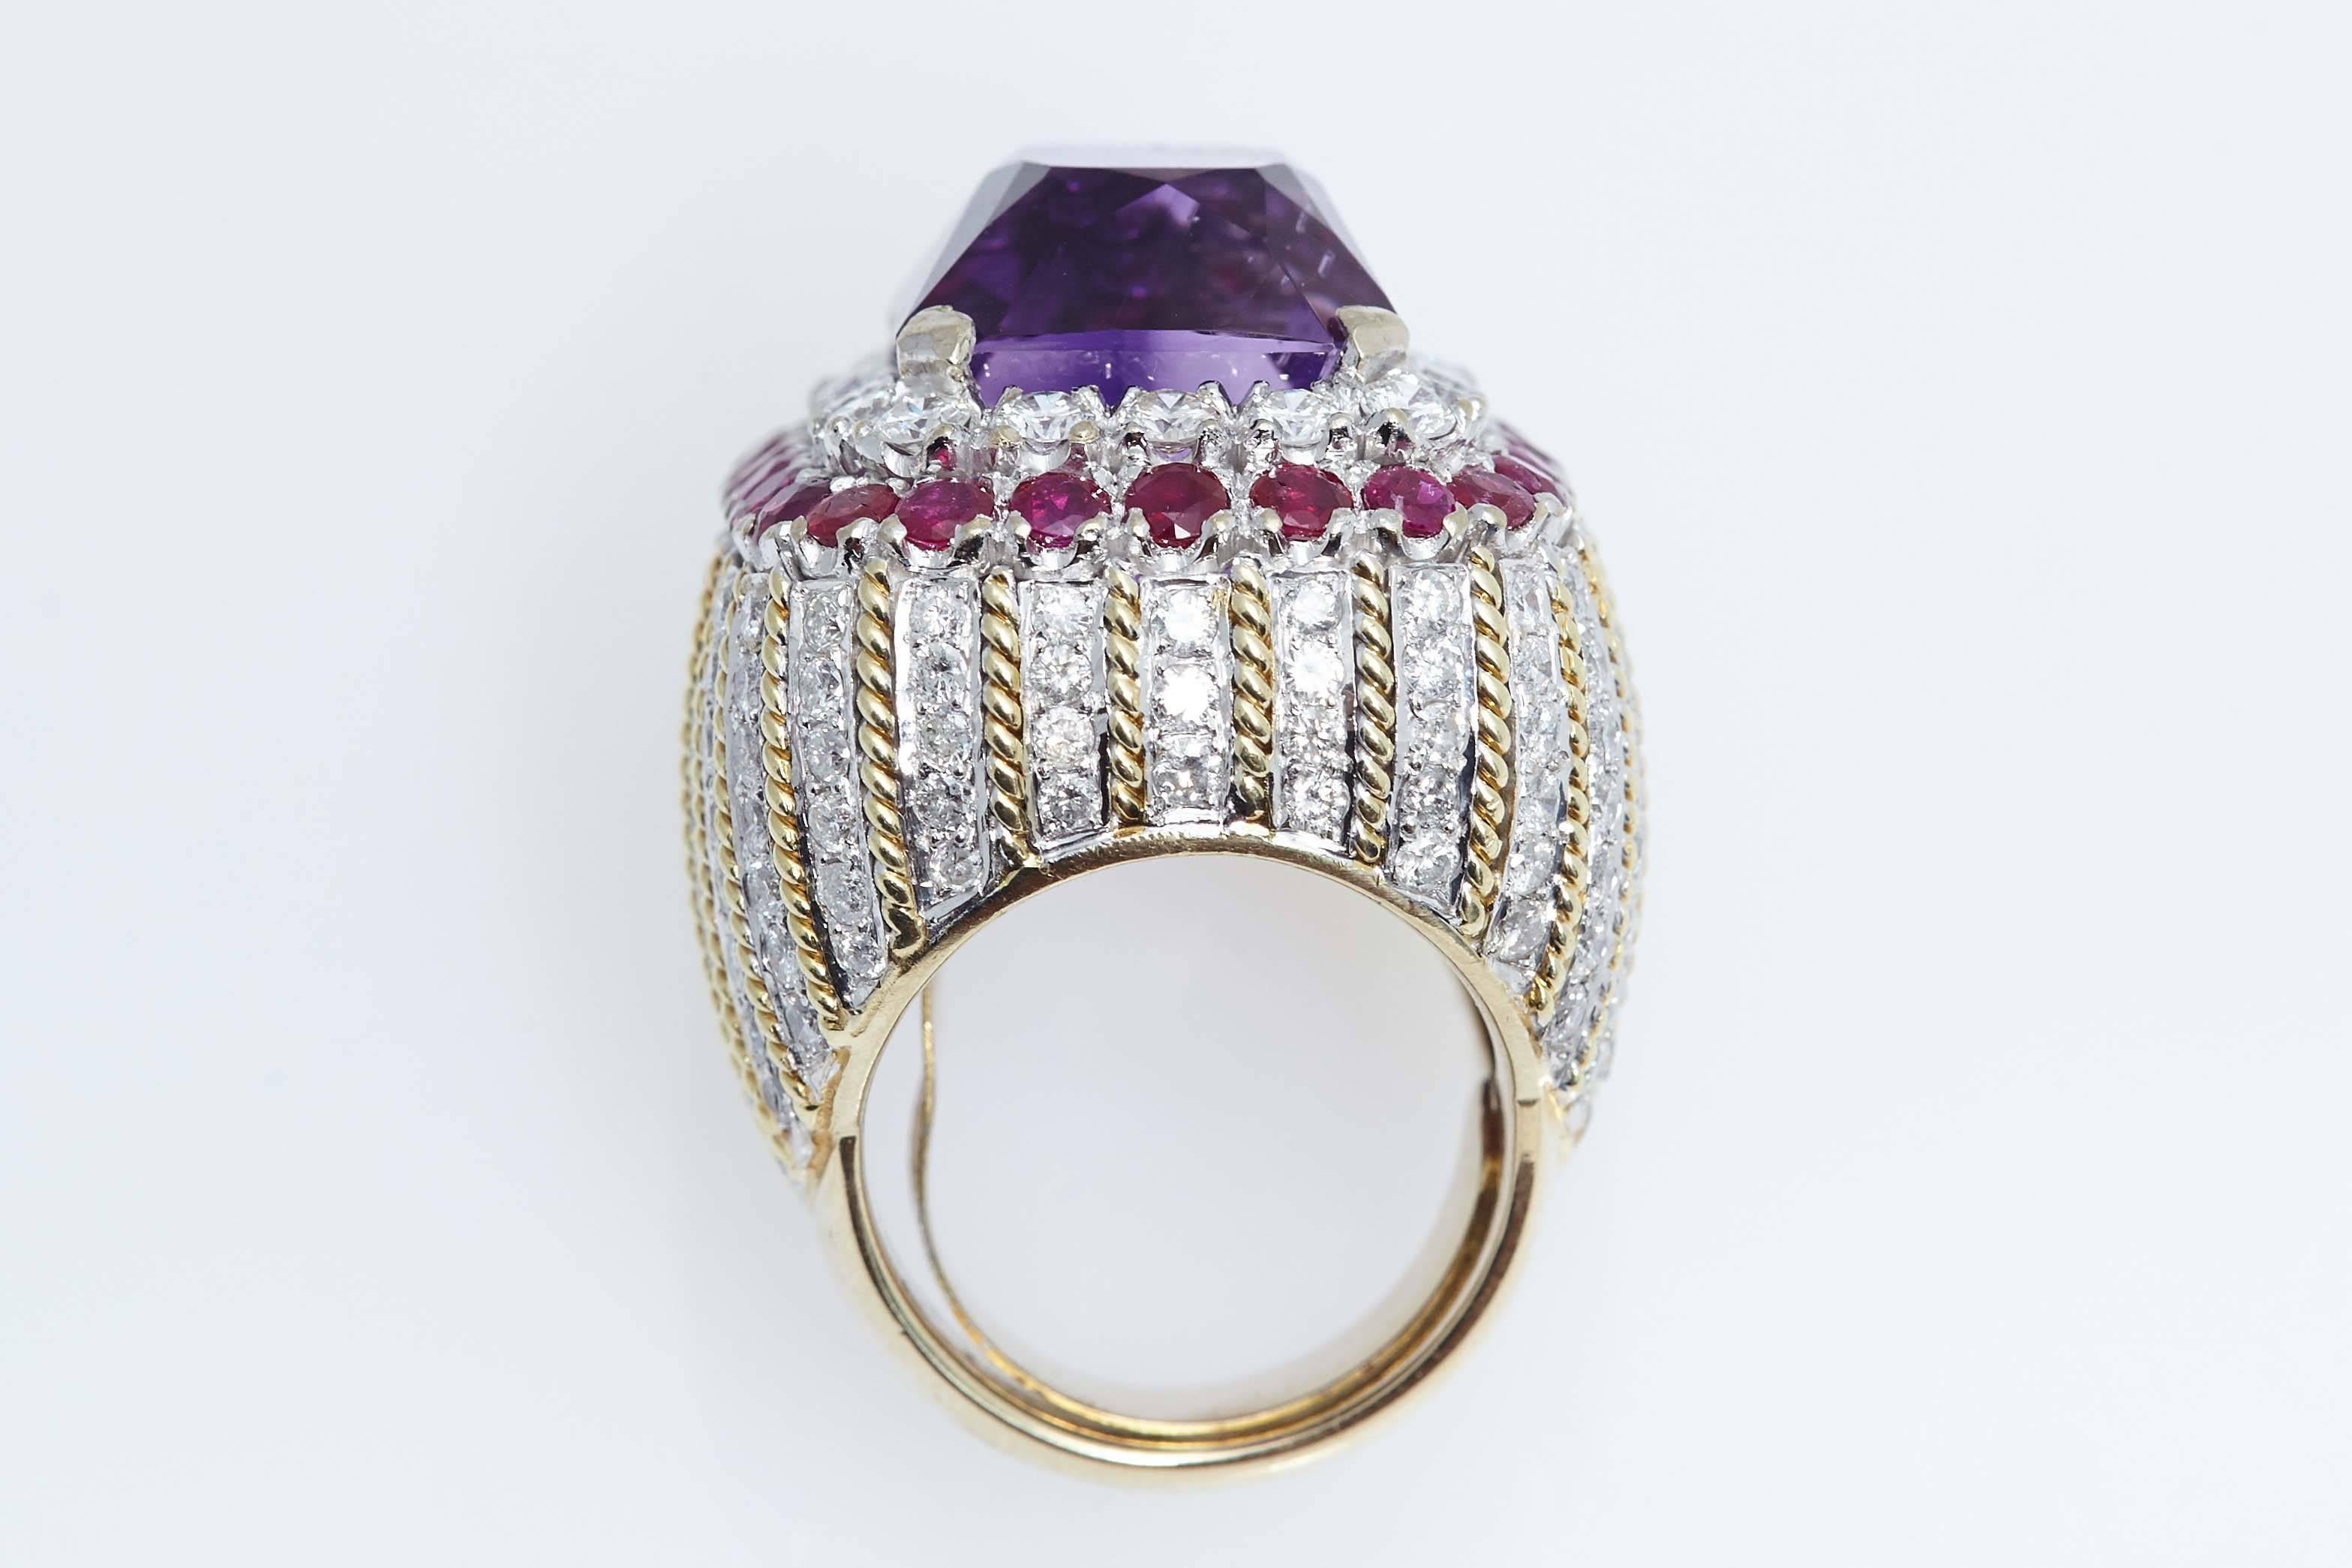 An Amethyst, Ruby, diamond fourteen karat bi-color gold cocktail ring.  The ring contains approximately 6.00 carats of round diamonds accented by 28 rubies weighing approximately 3.00 carats. The ring is size 7.